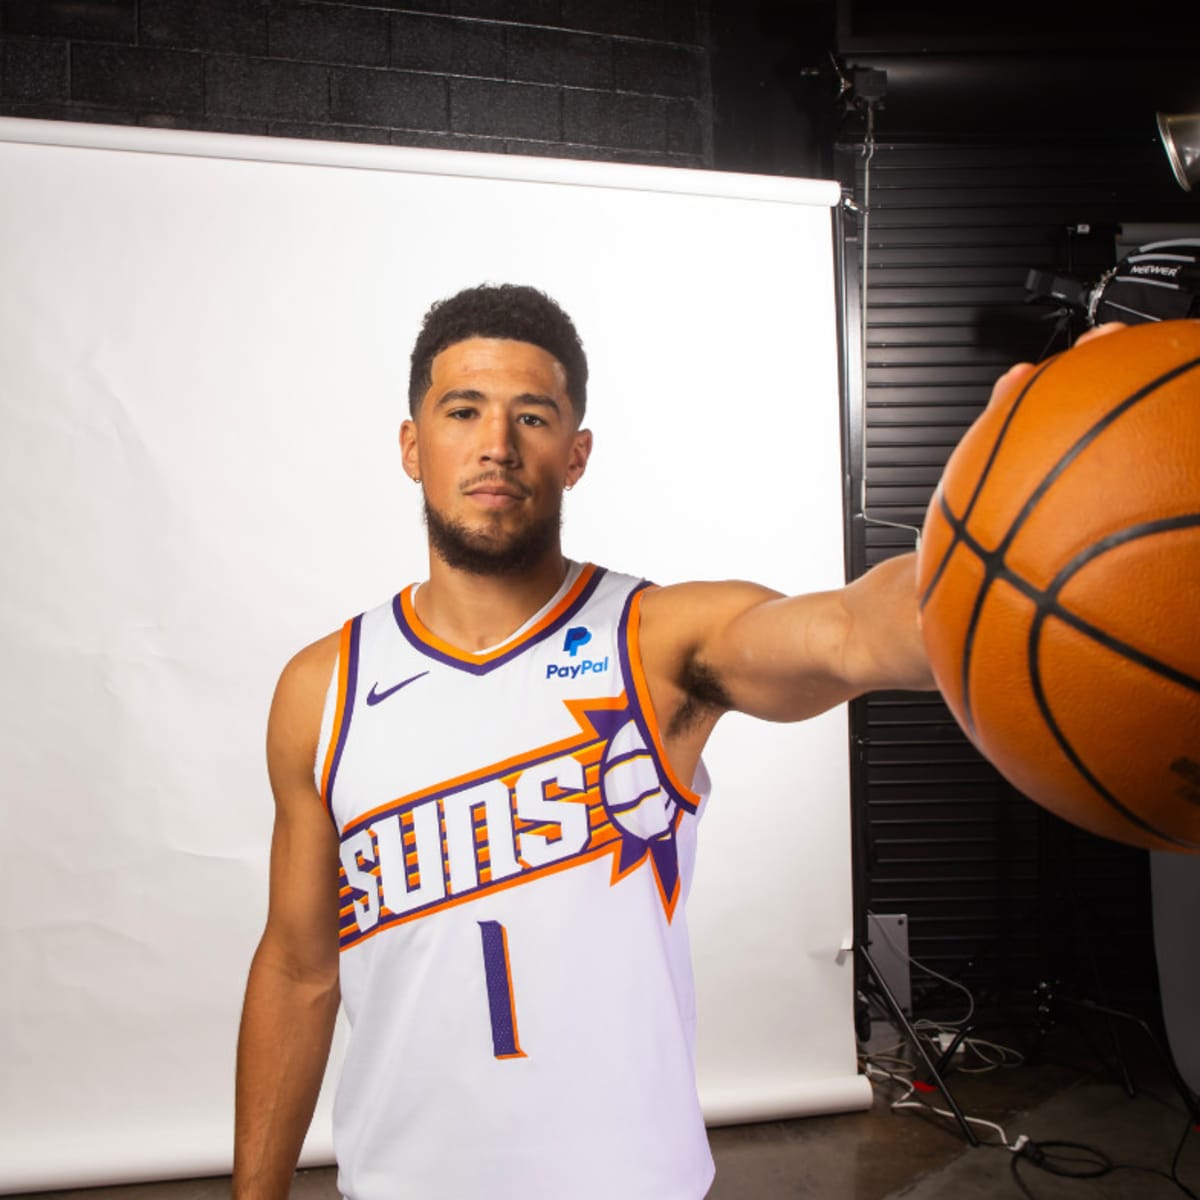 Phoenix Suns SG Devin Booker Getting Signature Nike Shoe - Sports  Illustrated Inside The Suns News, Analysis and More